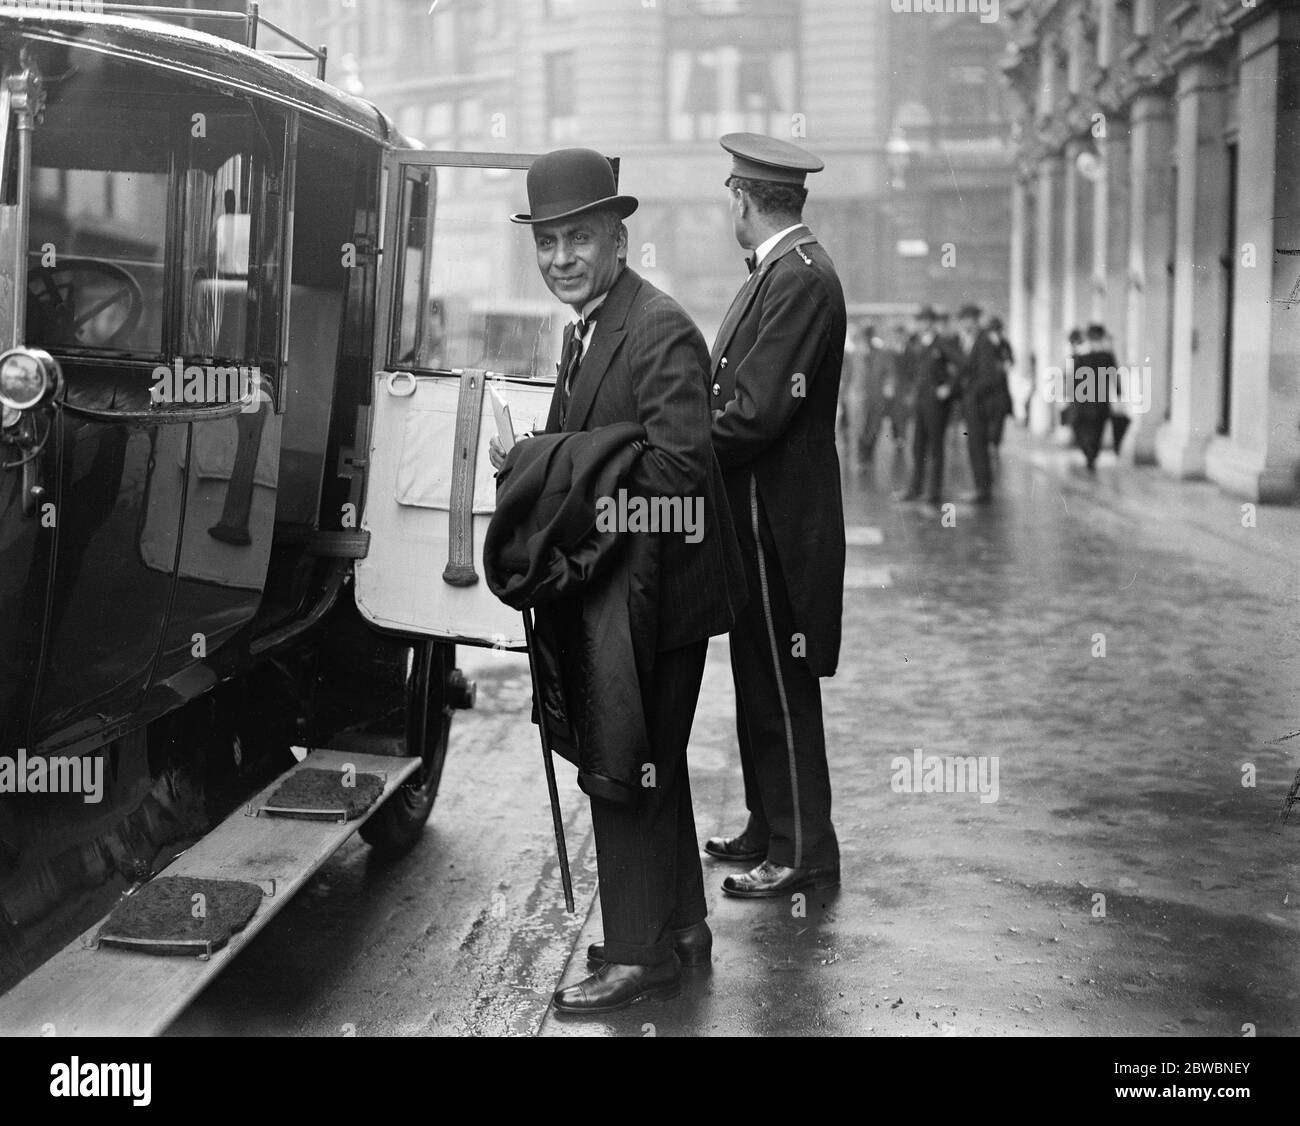 India ' s Imperial Confernece Representative Sir Bahada Sapru , one of the Indian representatives for theImperial Conference leaving the Carlton Hotel , London 25 September 1923 Stock Photo